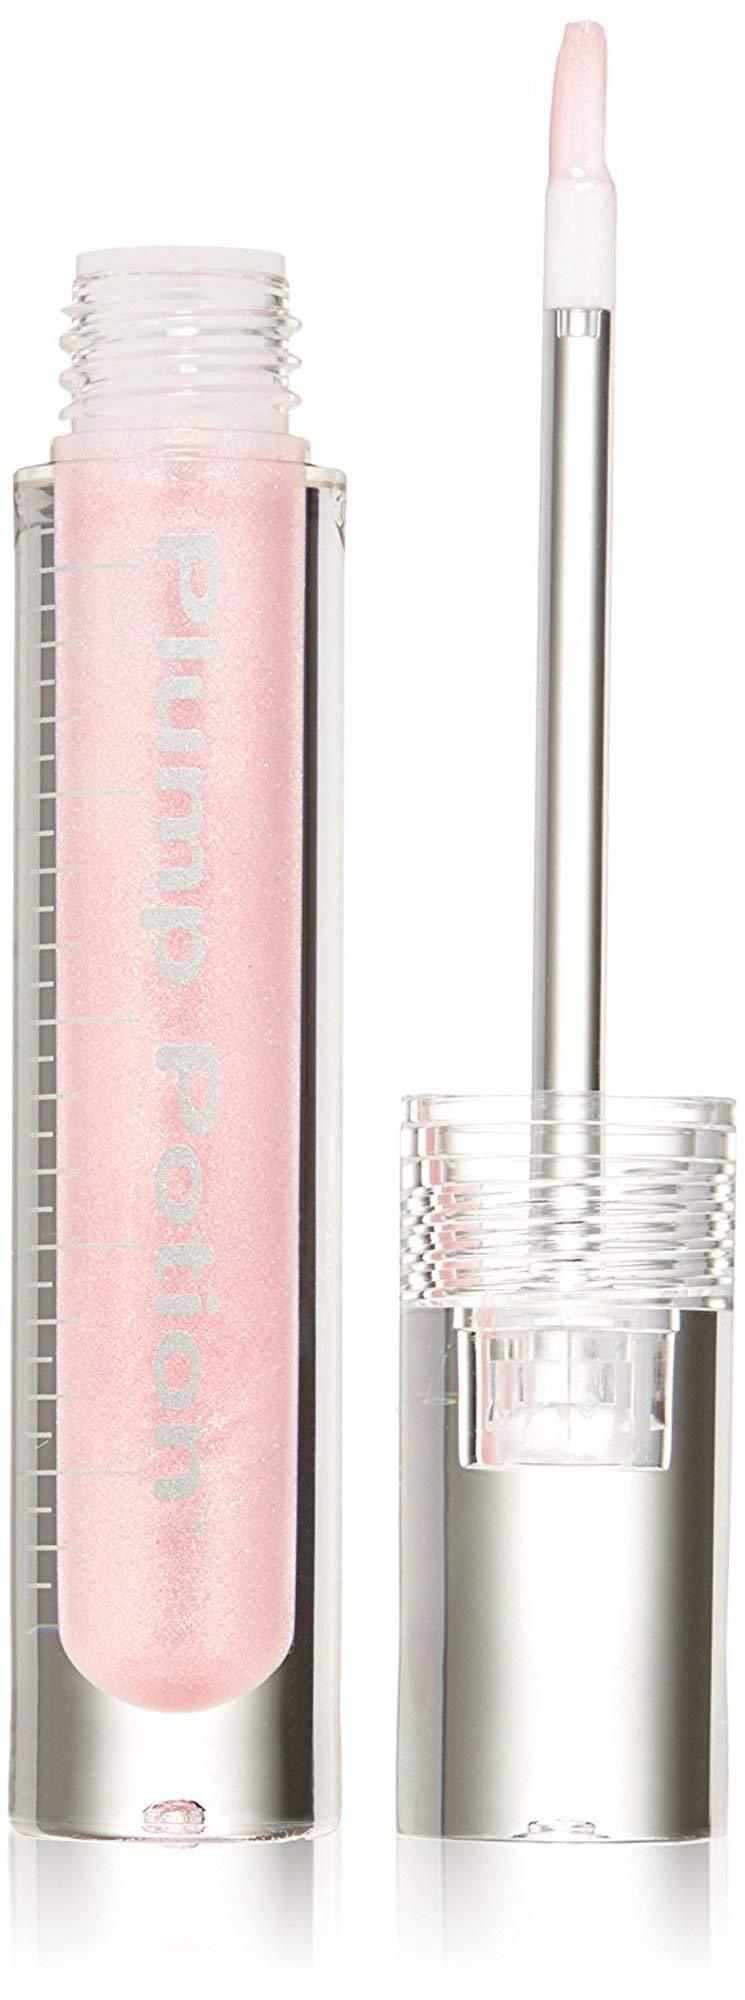 [Australia] - Physicians Formula Plump Potion Needle-Free Lip Plumping Cocktail Shade Extension, Pink Crystal Potion - 0.1 Ounce 